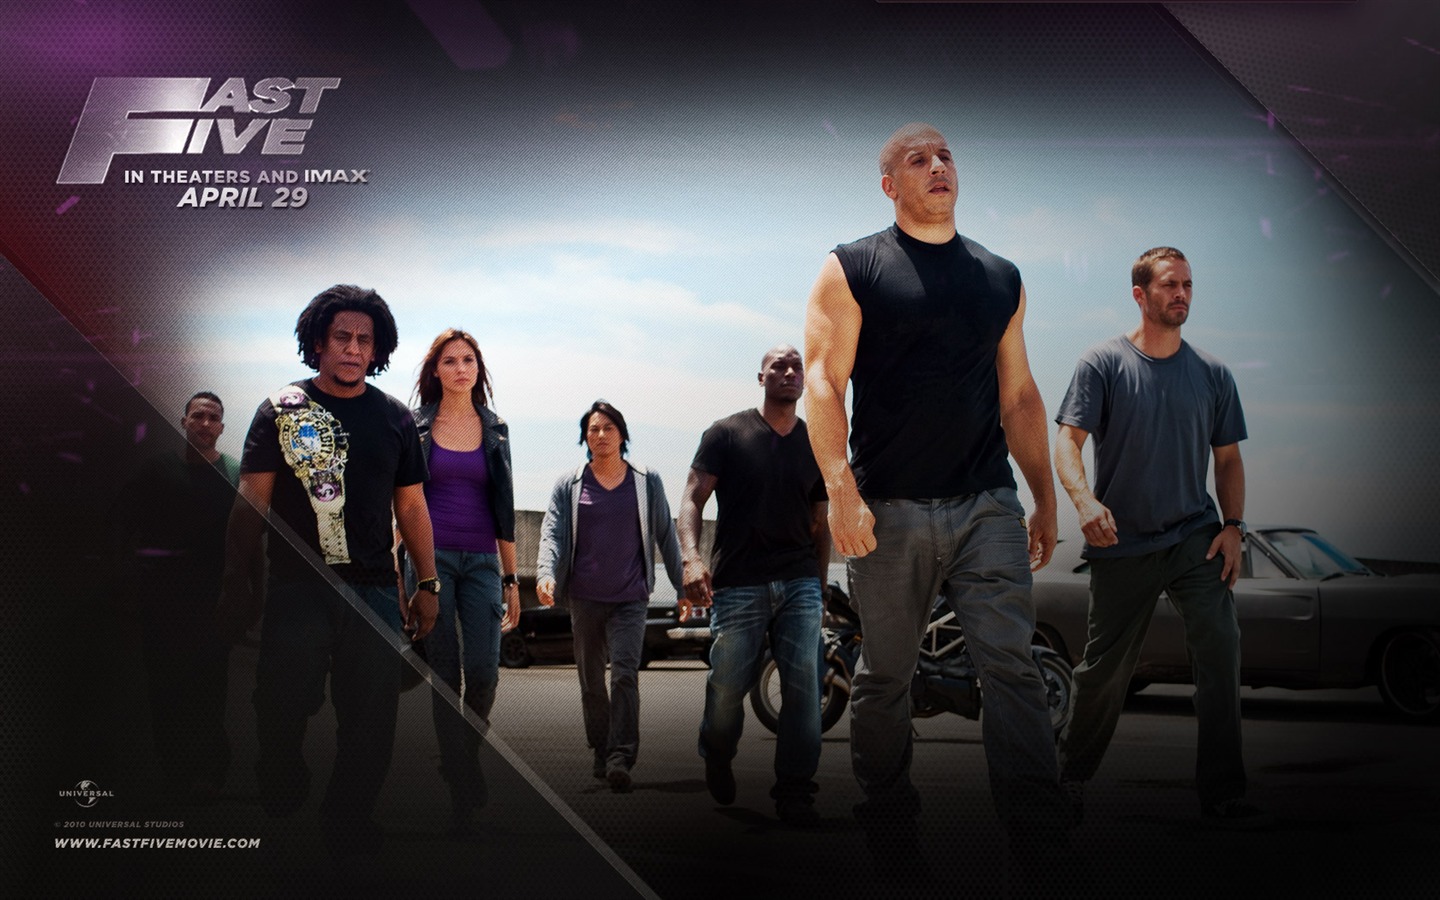 Fast Five wallpapers #1 - 1440x900